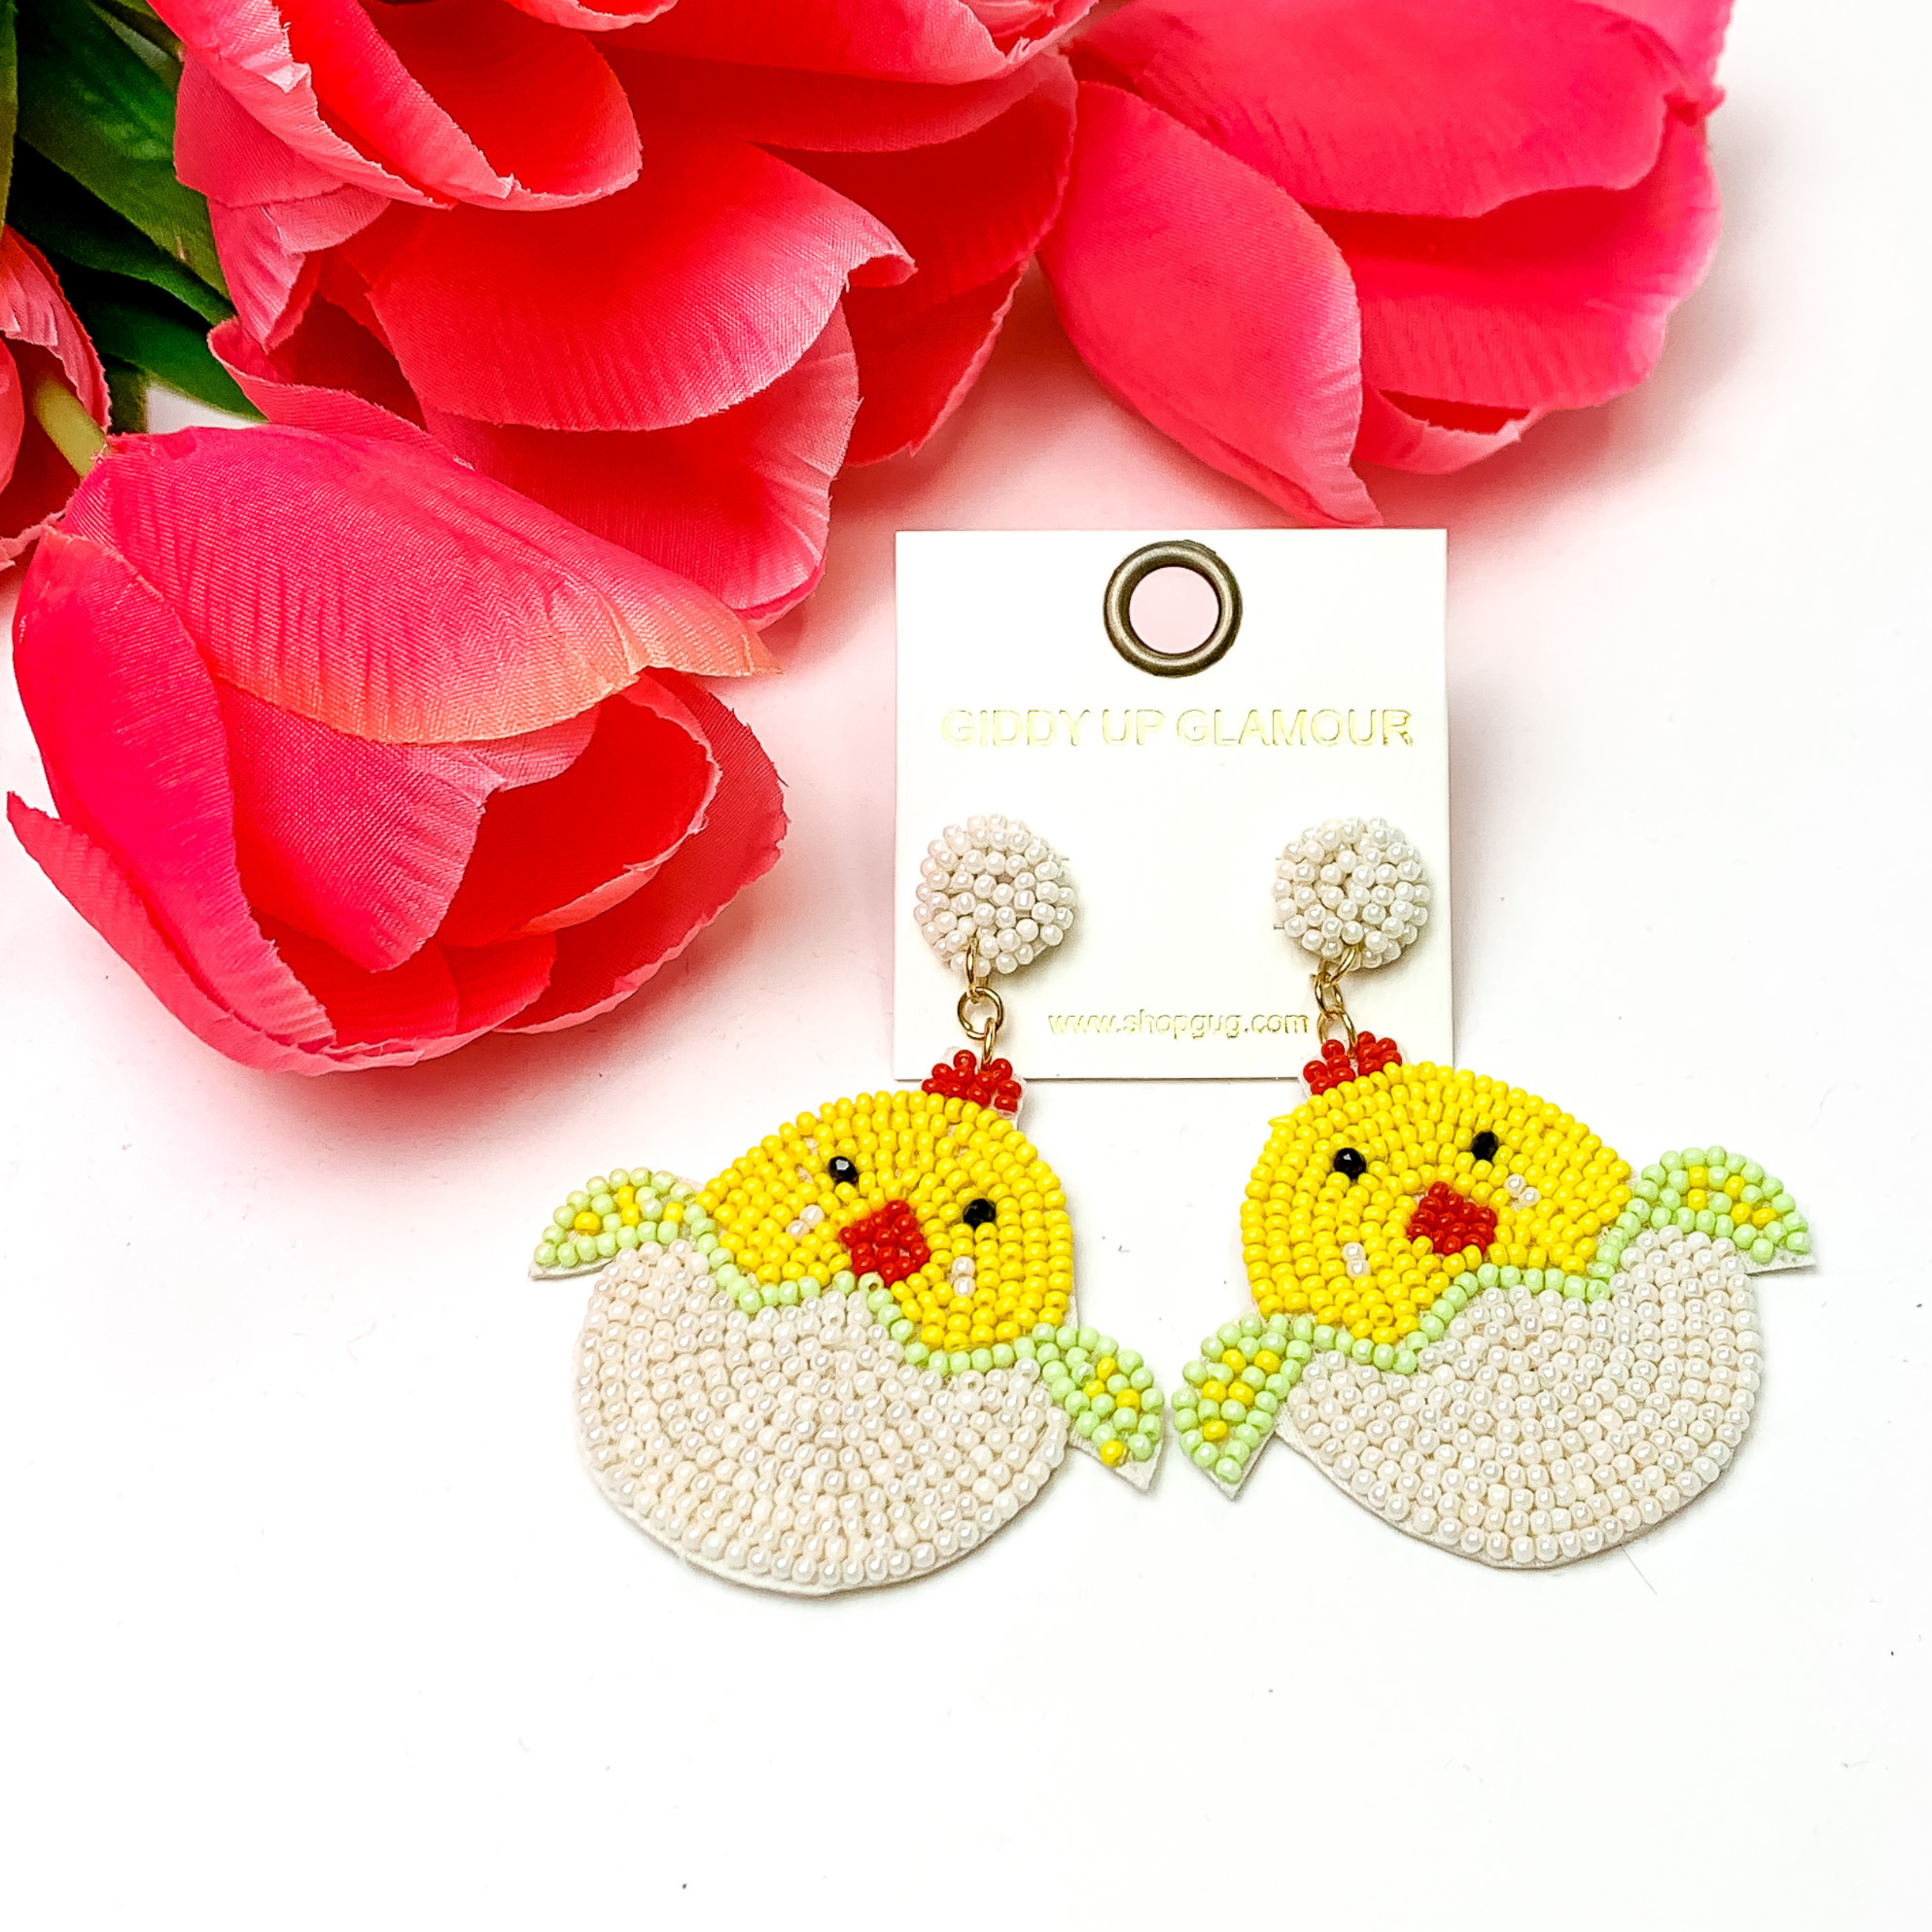 Beaded, white Easter egg earrings with a yellow beaded chick hatching. Pictured on white background with red-coral colored flowers.